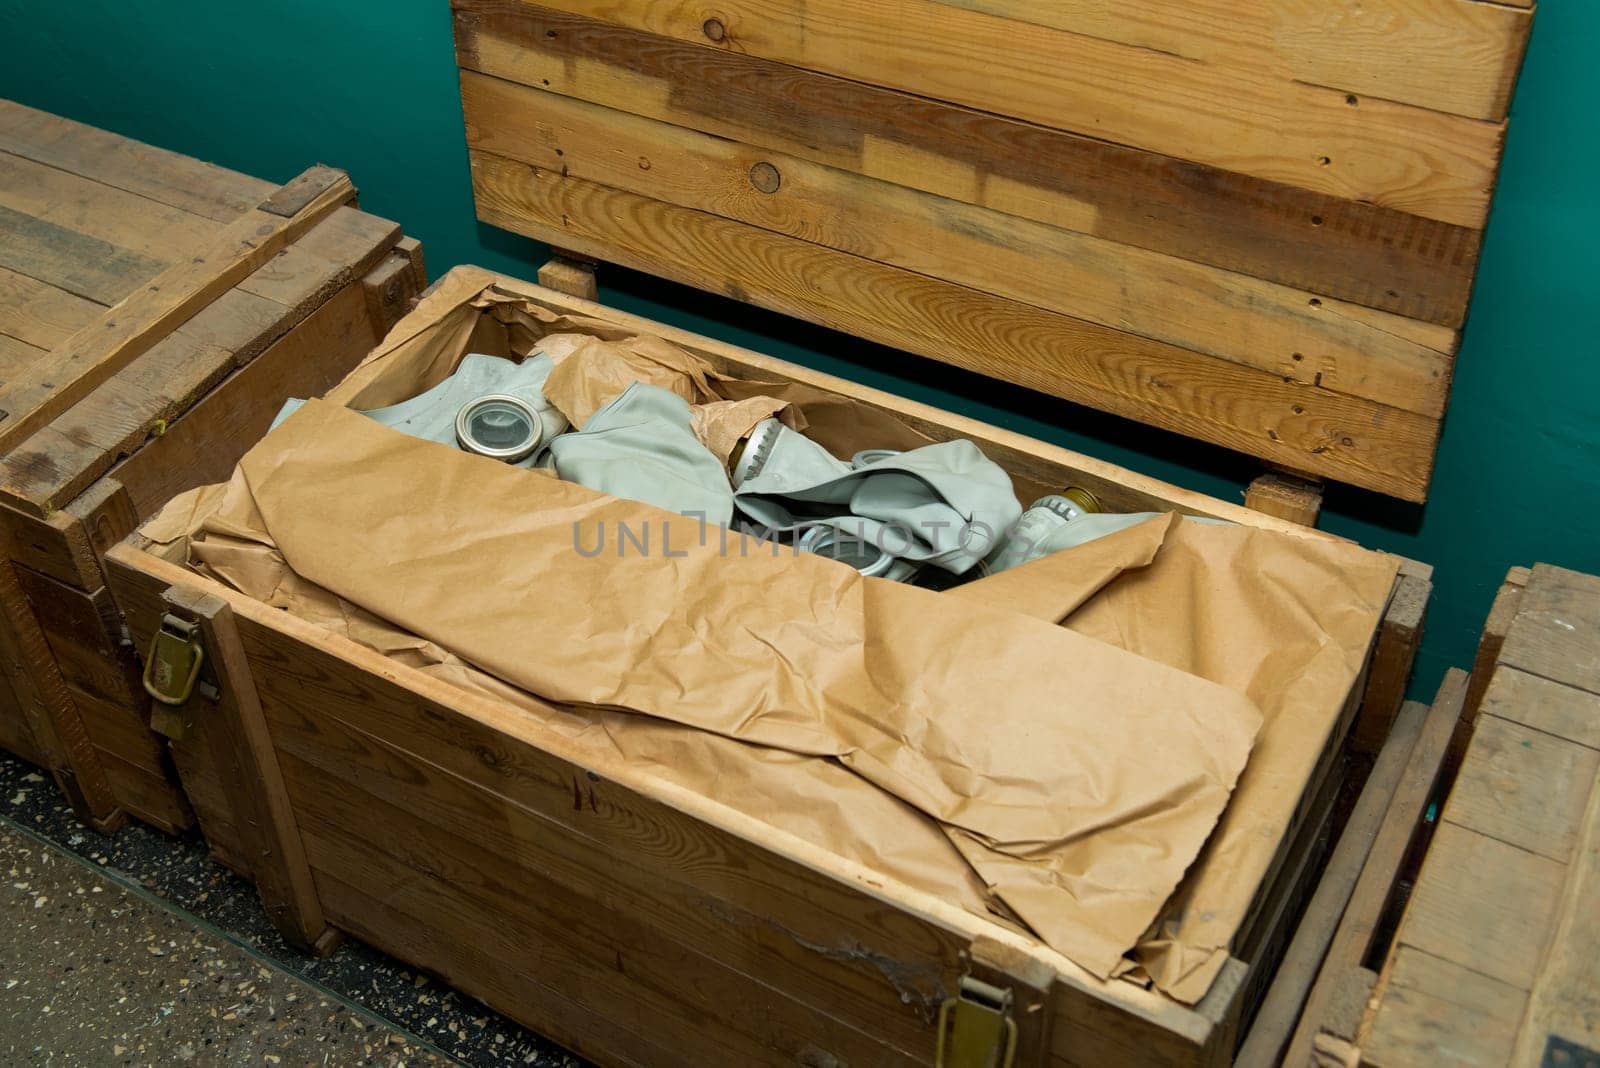 Soviet gas mask in a wooden box. Warehouse of Soviet protective equipment.